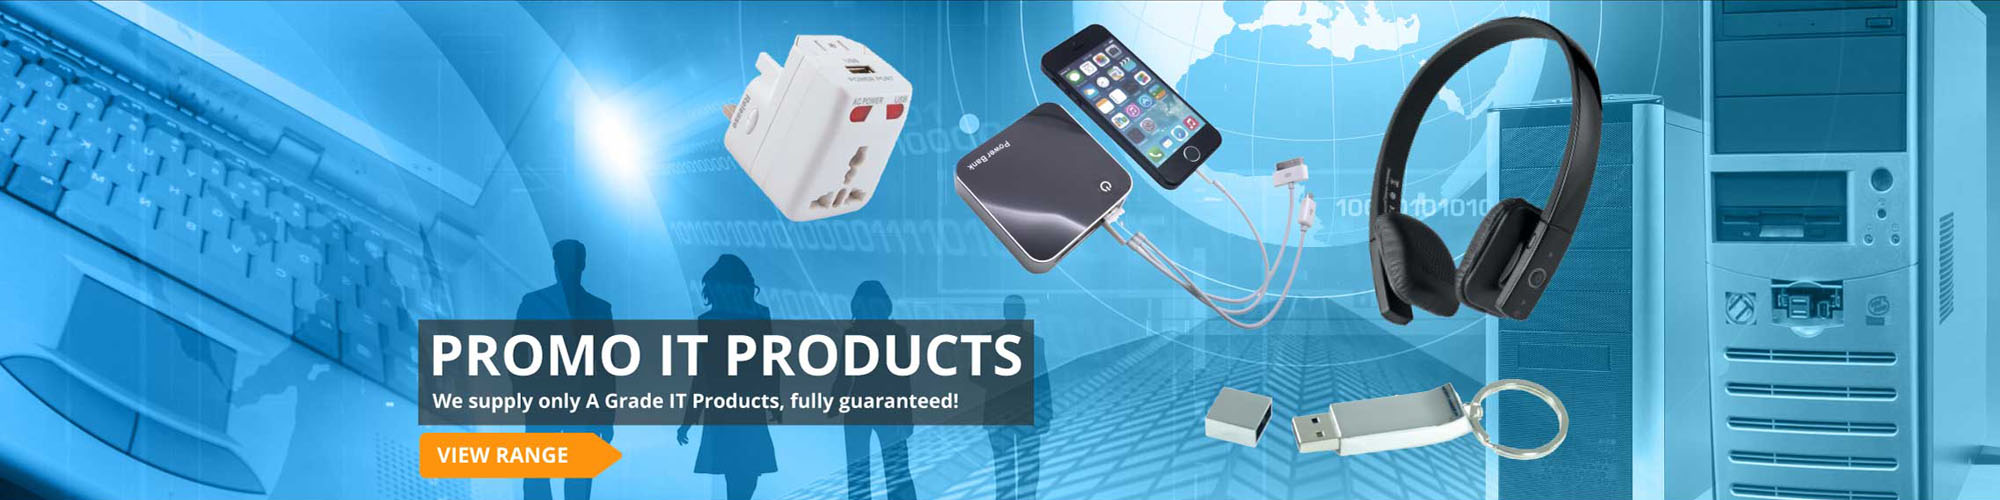 Promo IT products